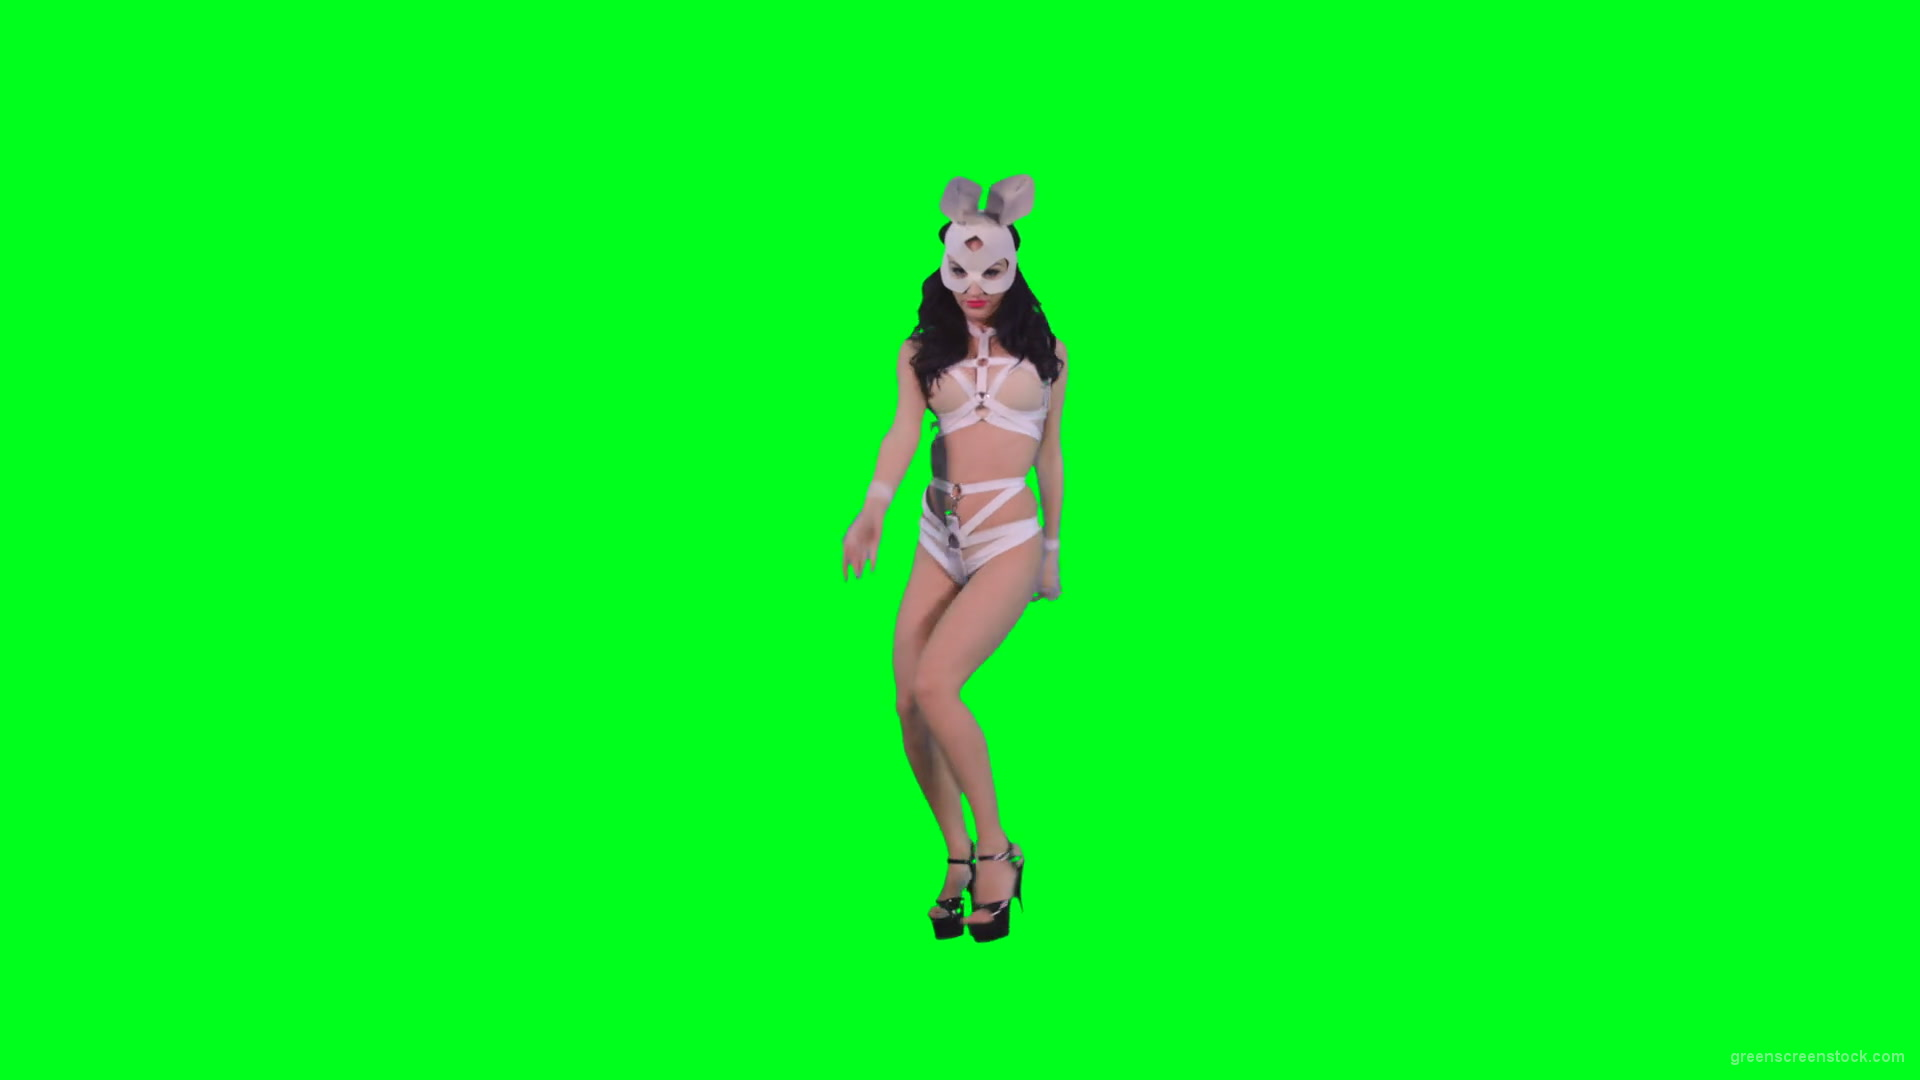 Black-hair-sexy-girl-in-playboy-costume-dancing-go-go-on-green-screen-4K-Video-Footage-1920_002 Green Screen Stock